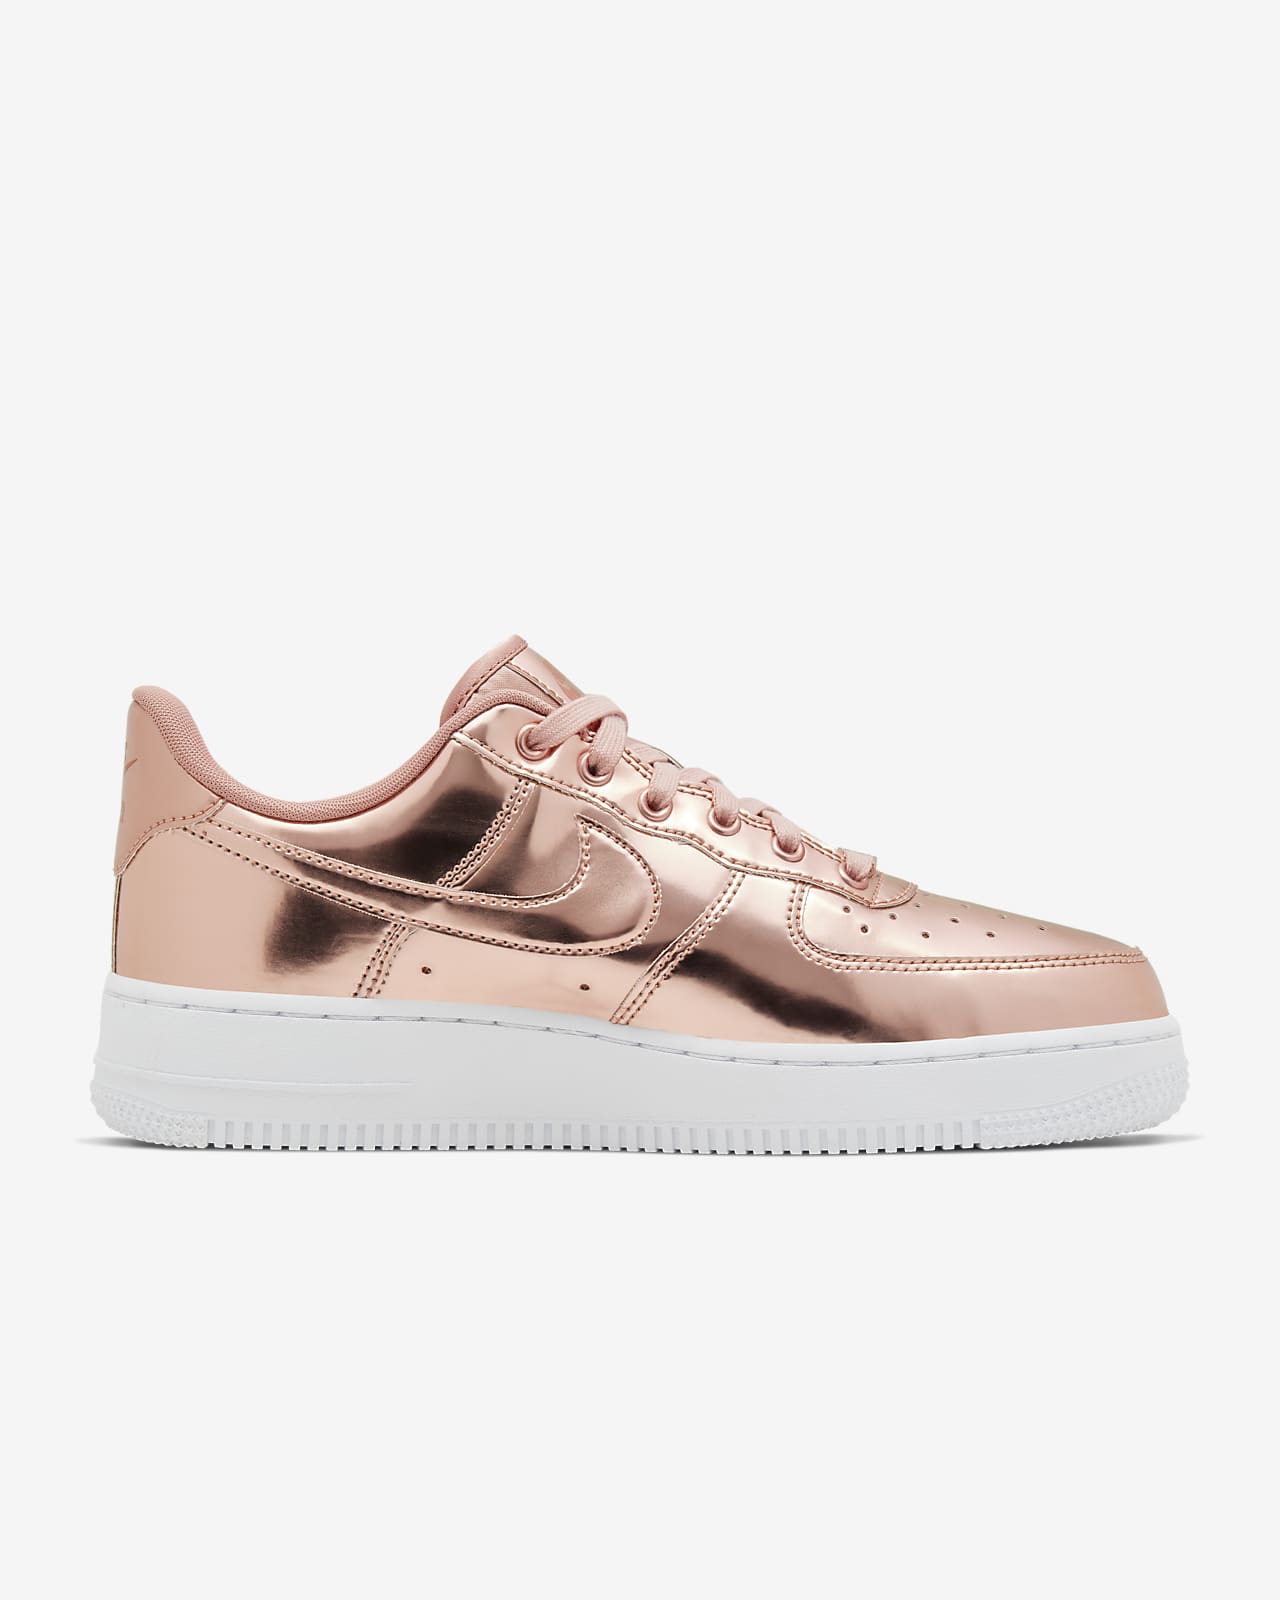 womens air force 1 pink